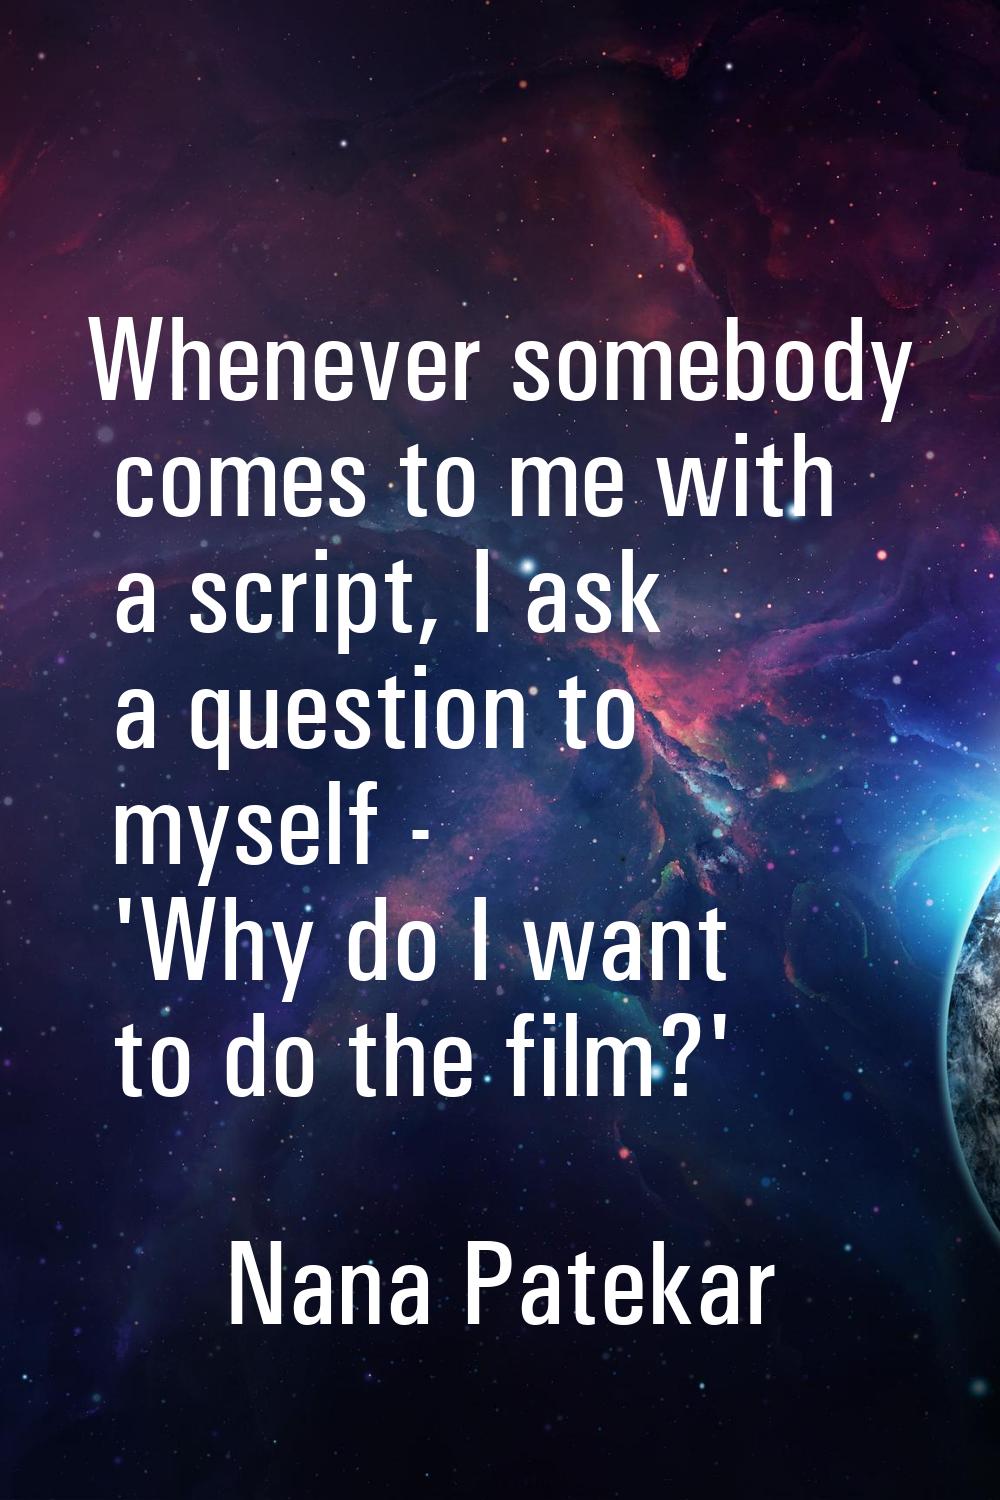 Whenever somebody comes to me with a script, I ask a question to myself - 'Why do I want to do the 